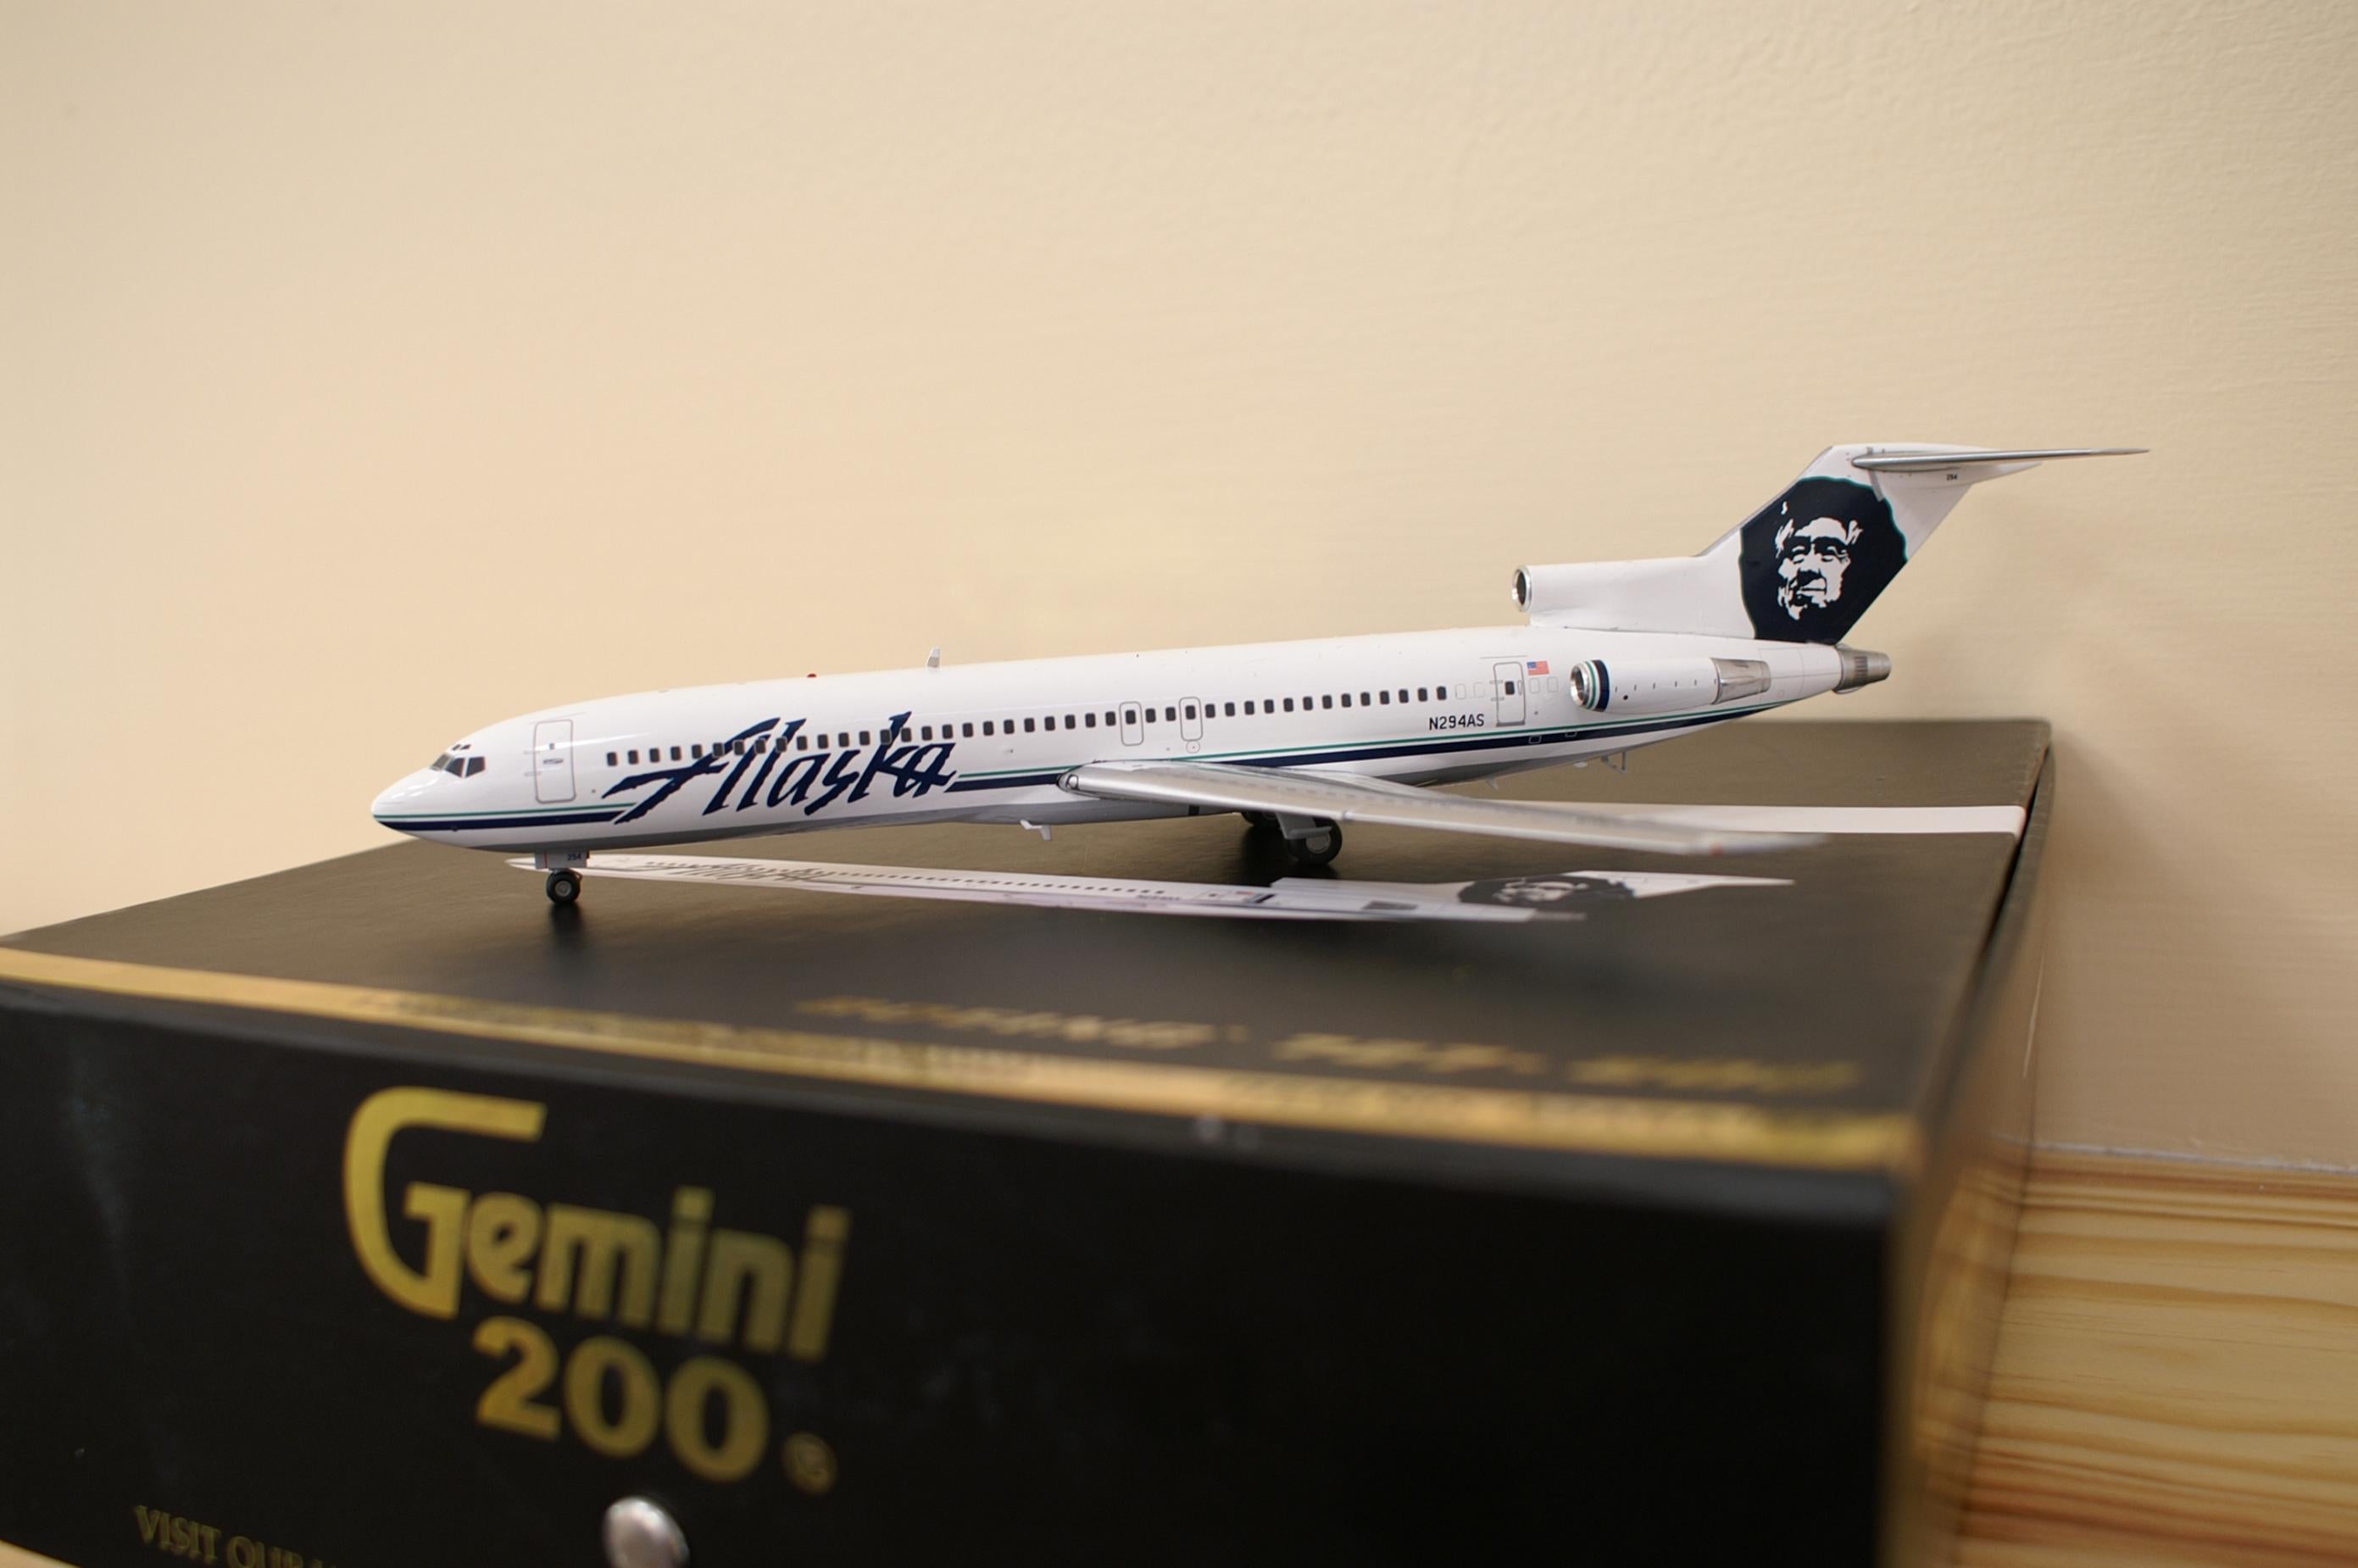 Alaska Boeing 727-200 is landed into my collection - DA.C